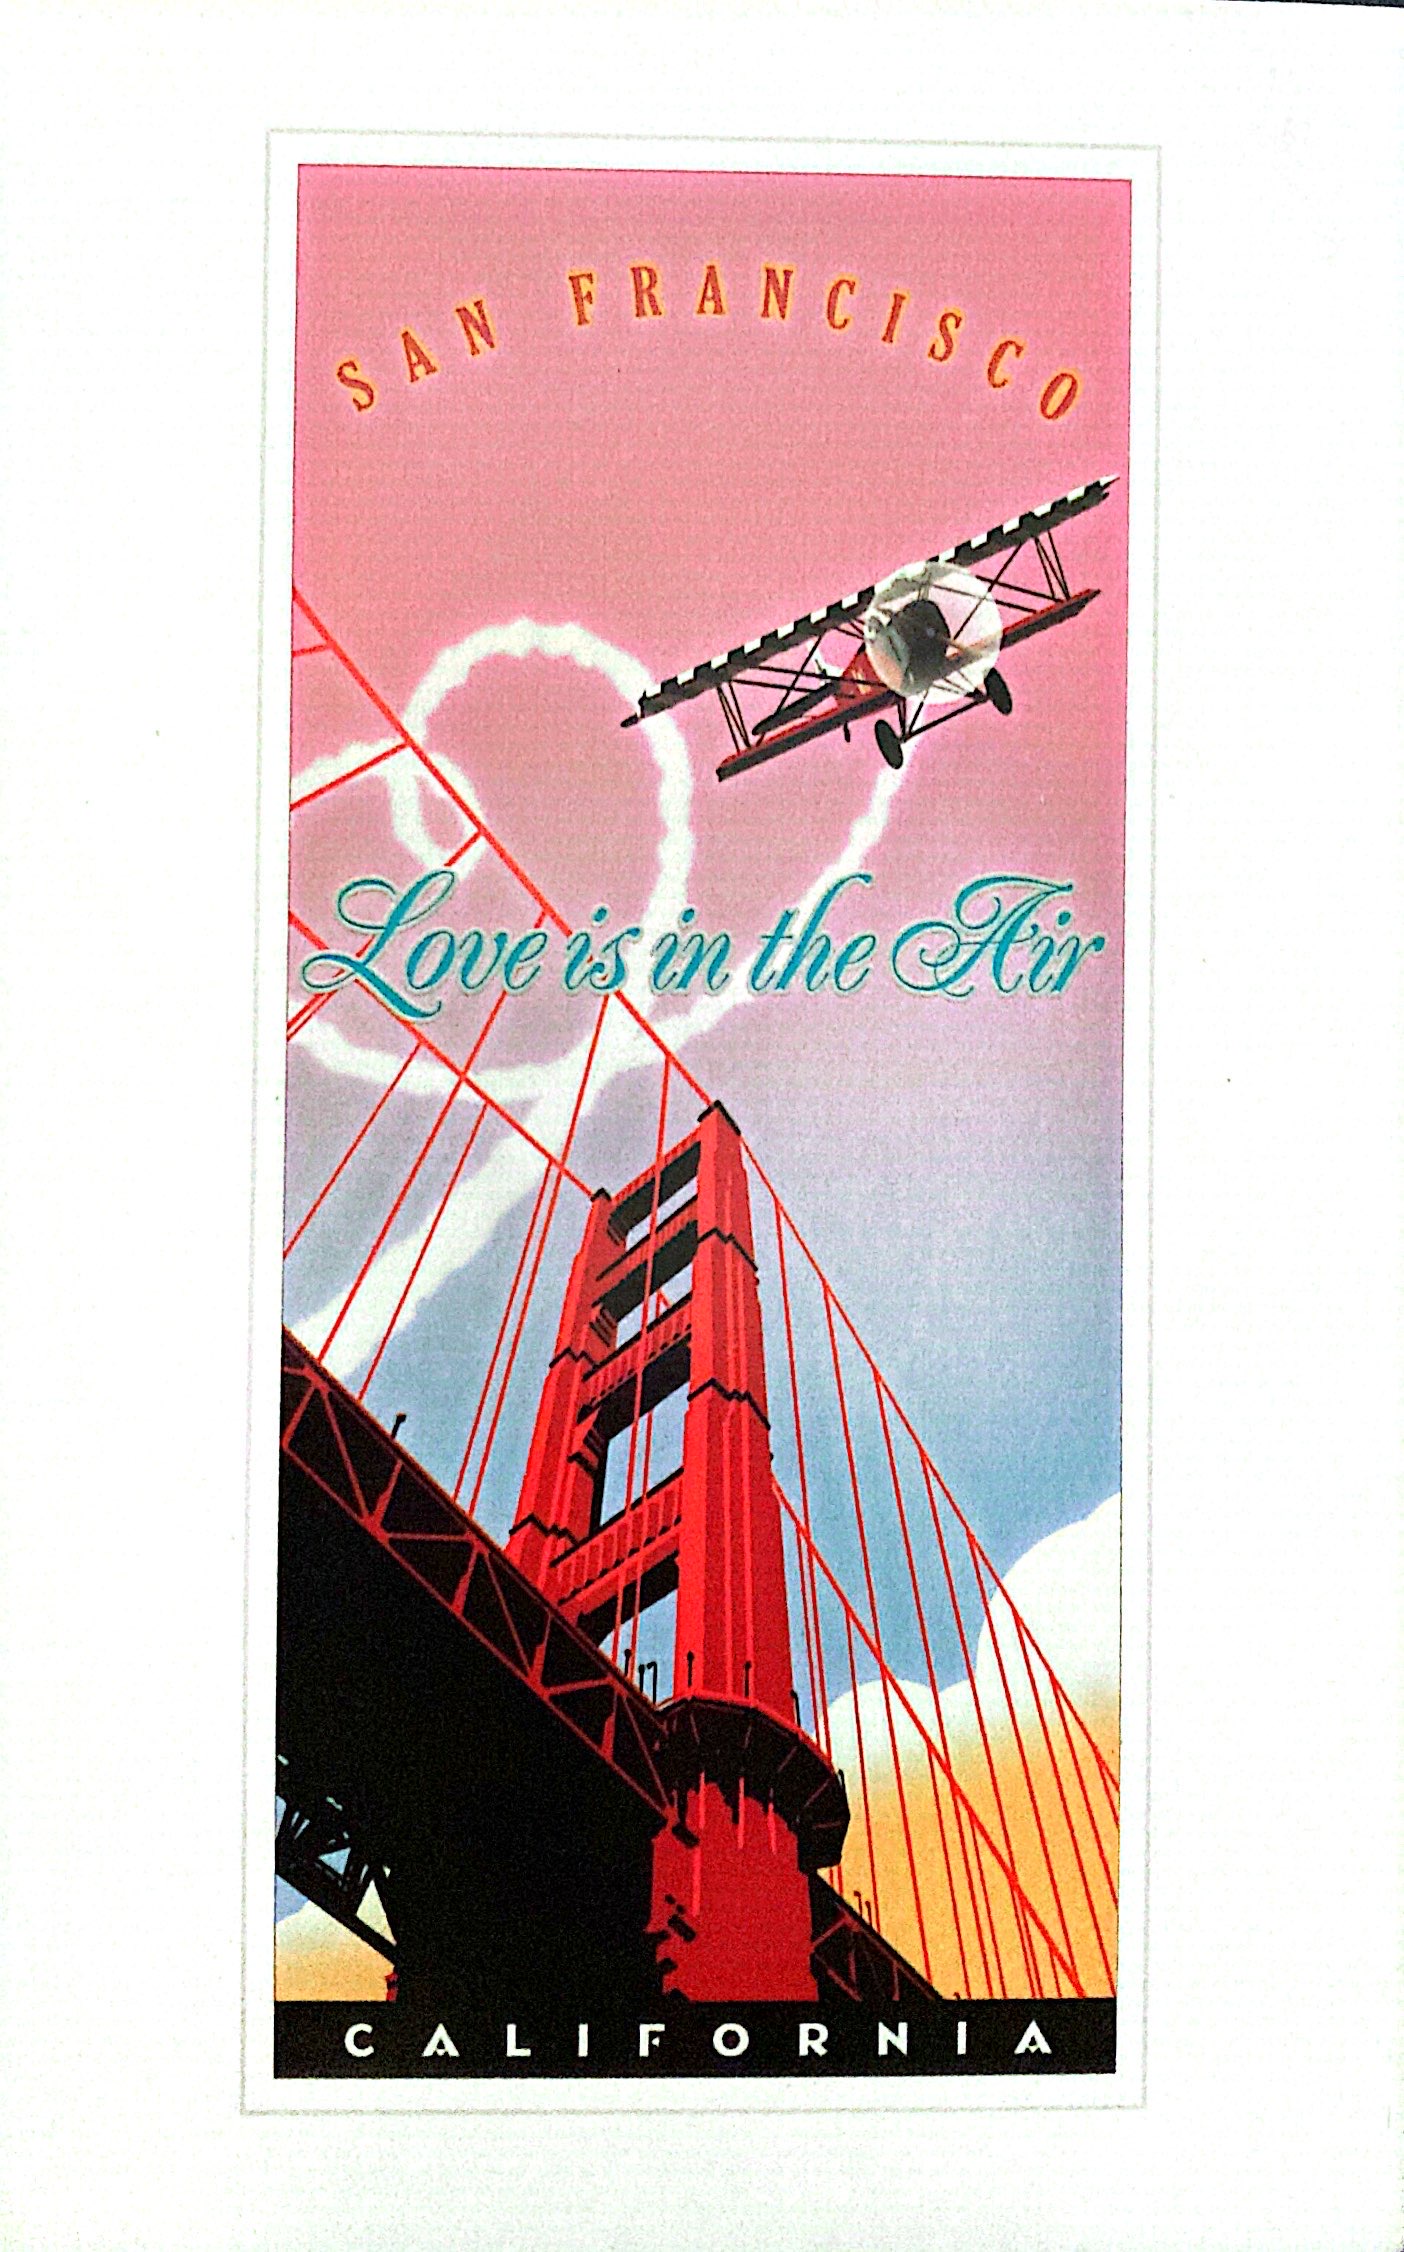 "Love is in the Air" a cute little airplane flying over the Golden Gate Bridge